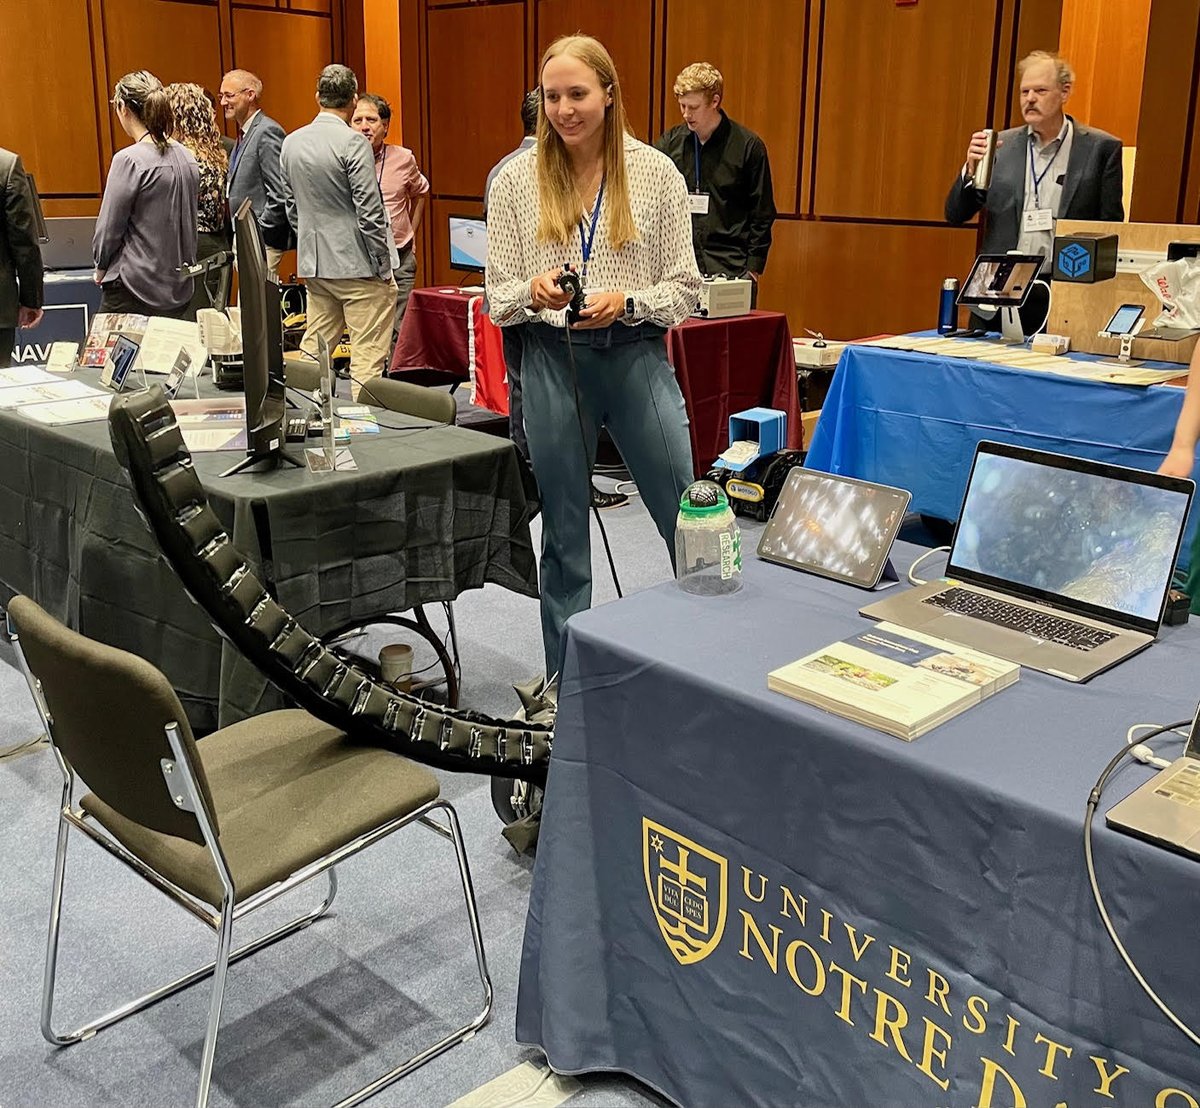 As the U.S. Senate continues to focus on AI's potential and innovation in robotics, researchers from @NotreDame are supplying key next steps. At the Senate's robotics showcase, Margaret Coad of @AeroMechND + two doctoral students shared cutting-edge developments.